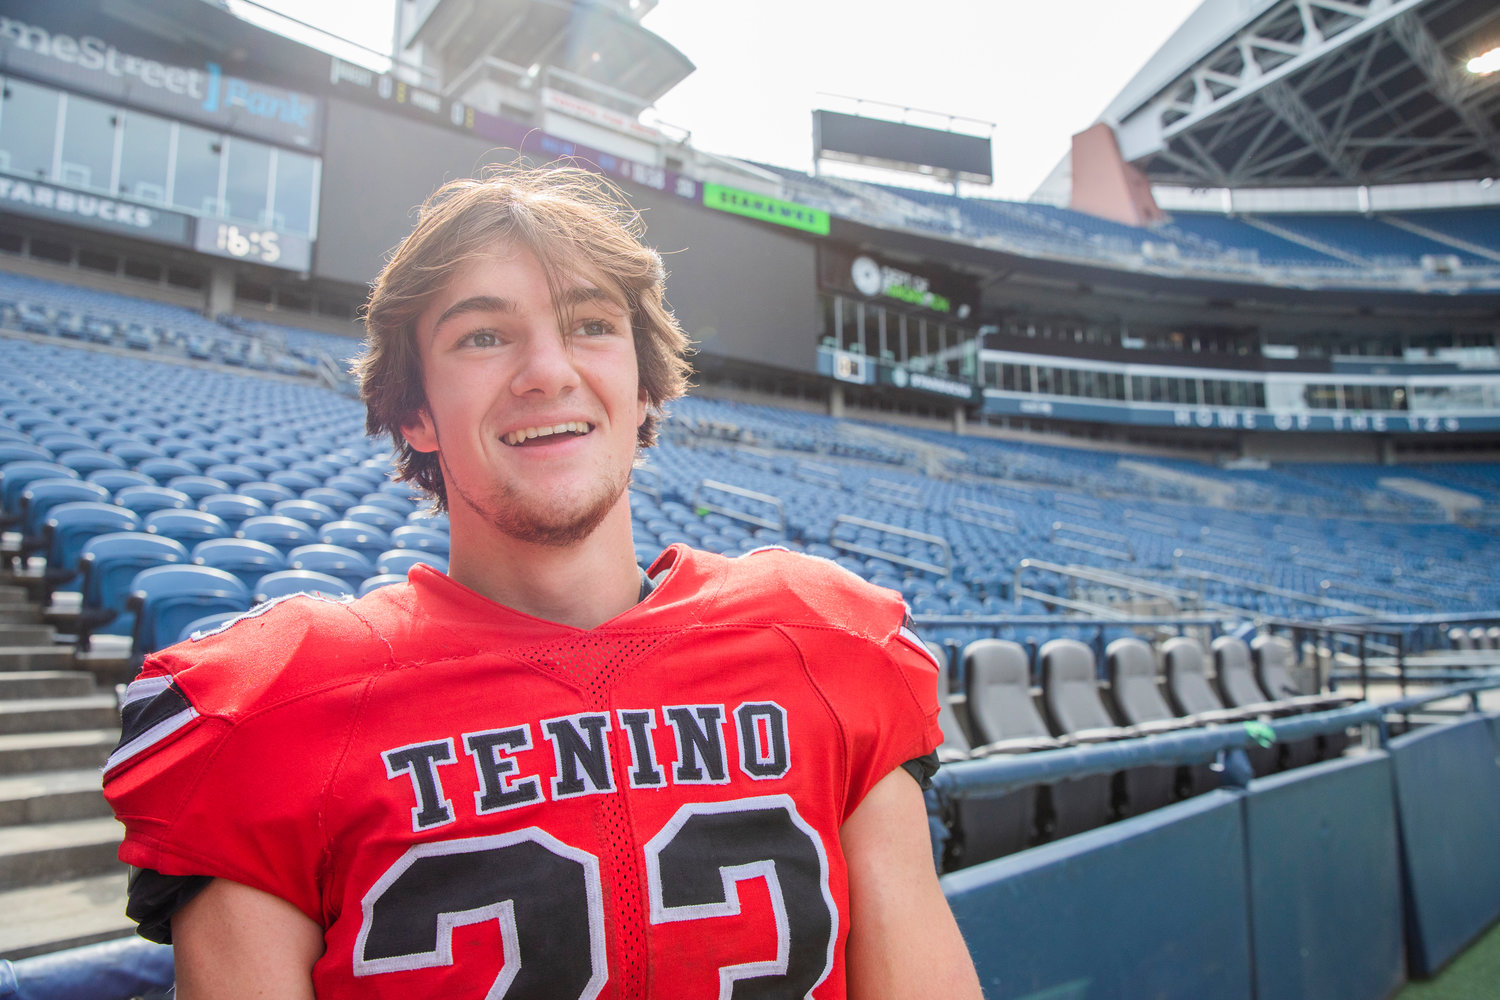 Tenino senior Dylan Spicer (23) smiles while talking about his experience playing at Lumen Field, home of the Seahawks, Saturday afternoon at Lumen Field in Seattle.